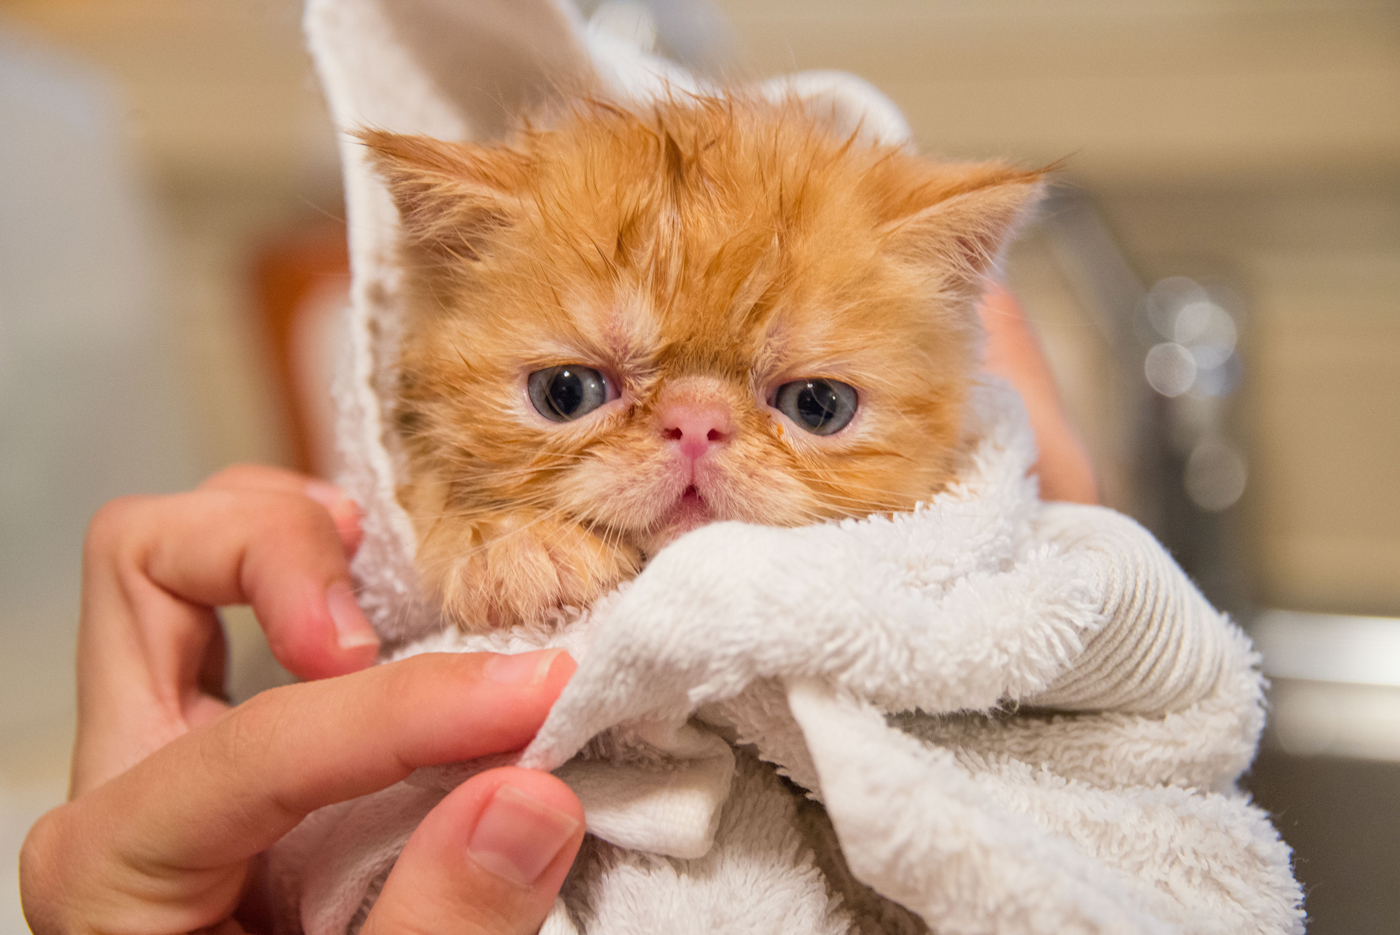 A new born kitten wrapped in a towel